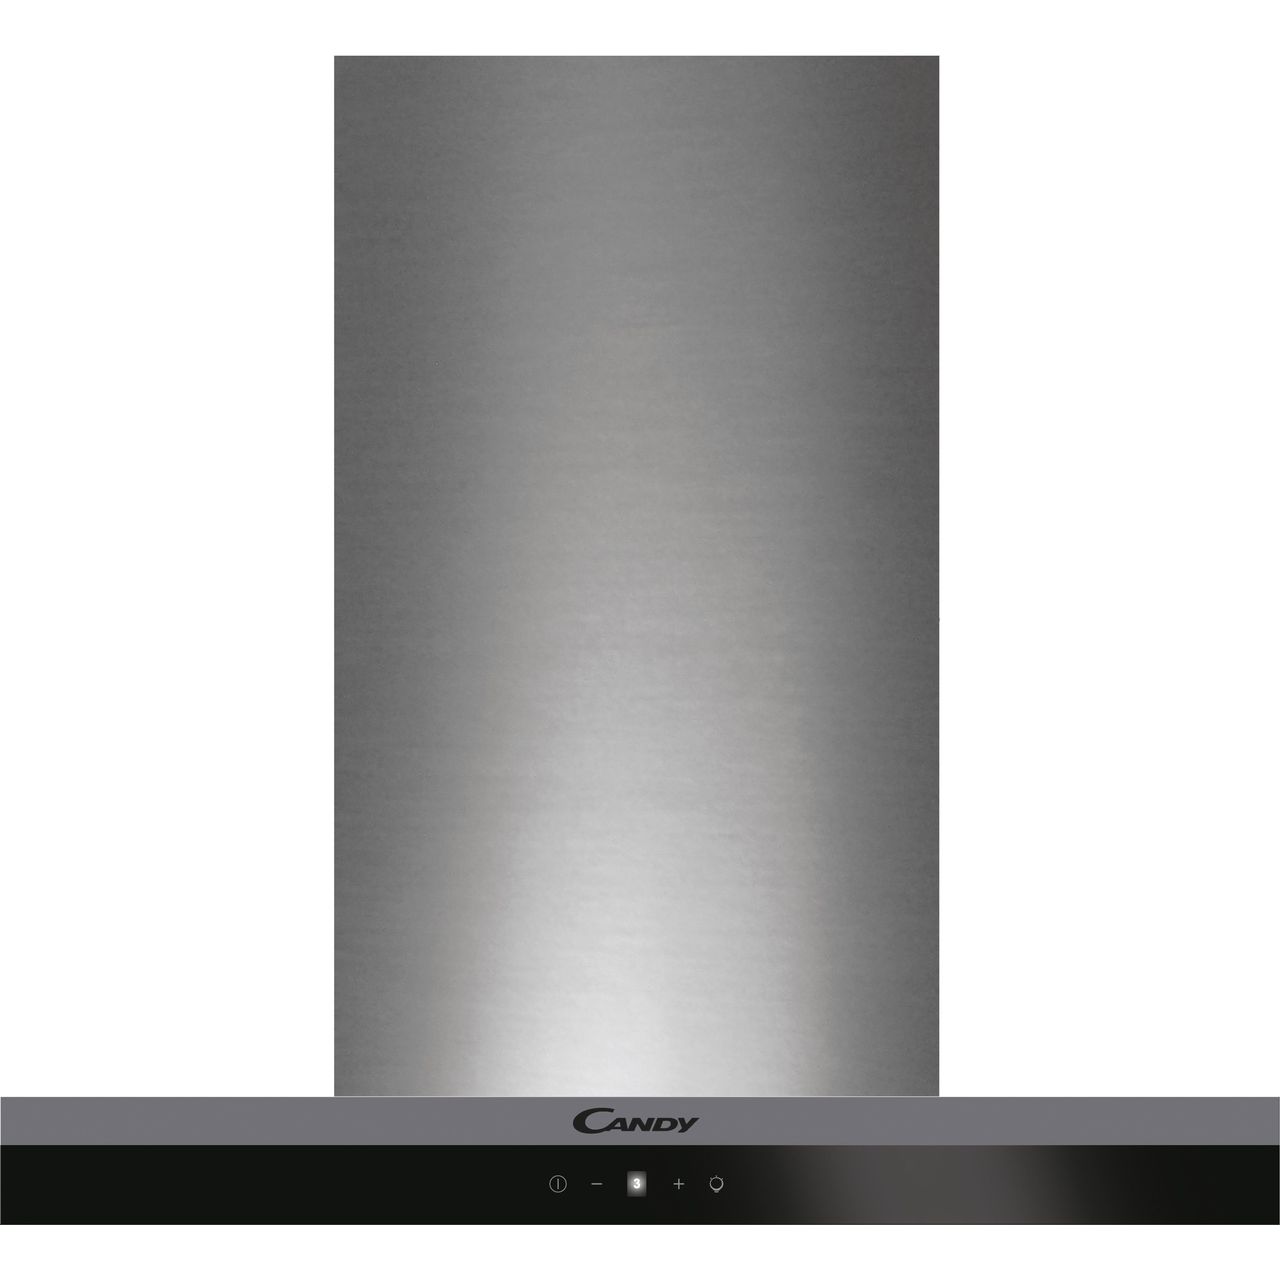 Candy CTS6CEX 60 cm Chimney Cooker Hood Review